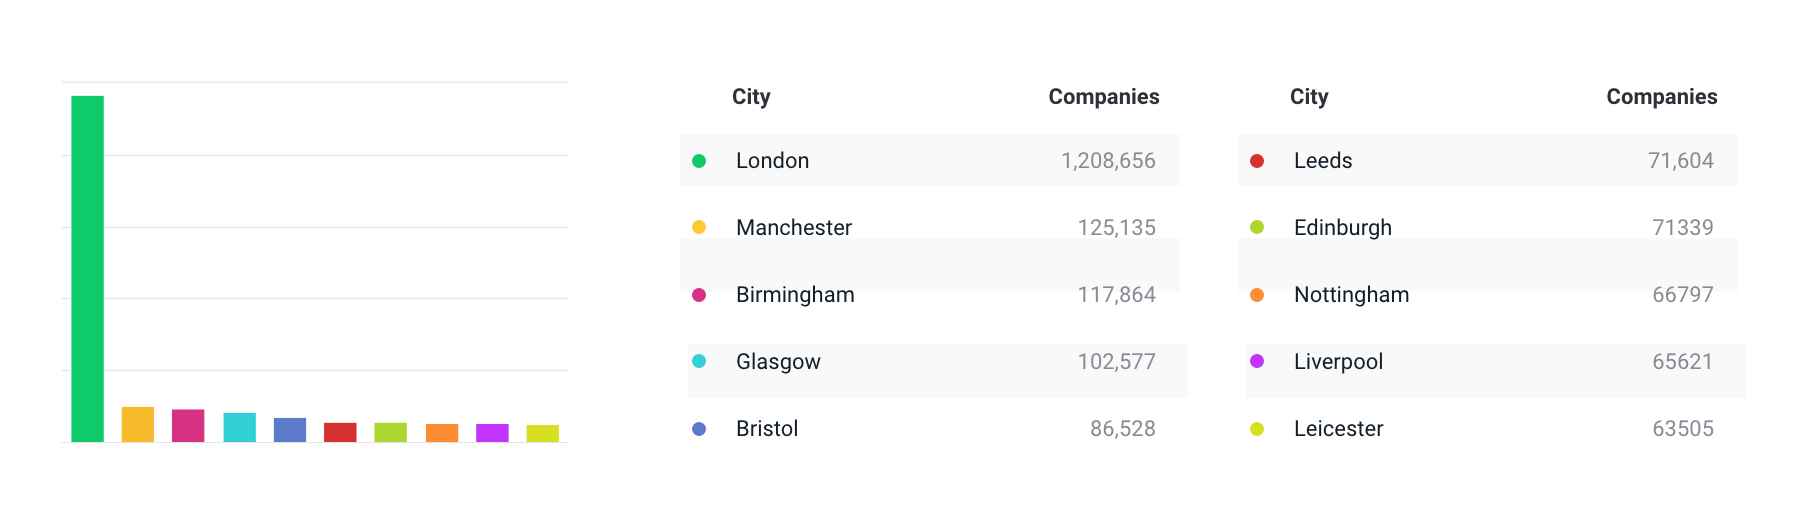 Database of Companies in the UK: Top Industries and Biggest Players